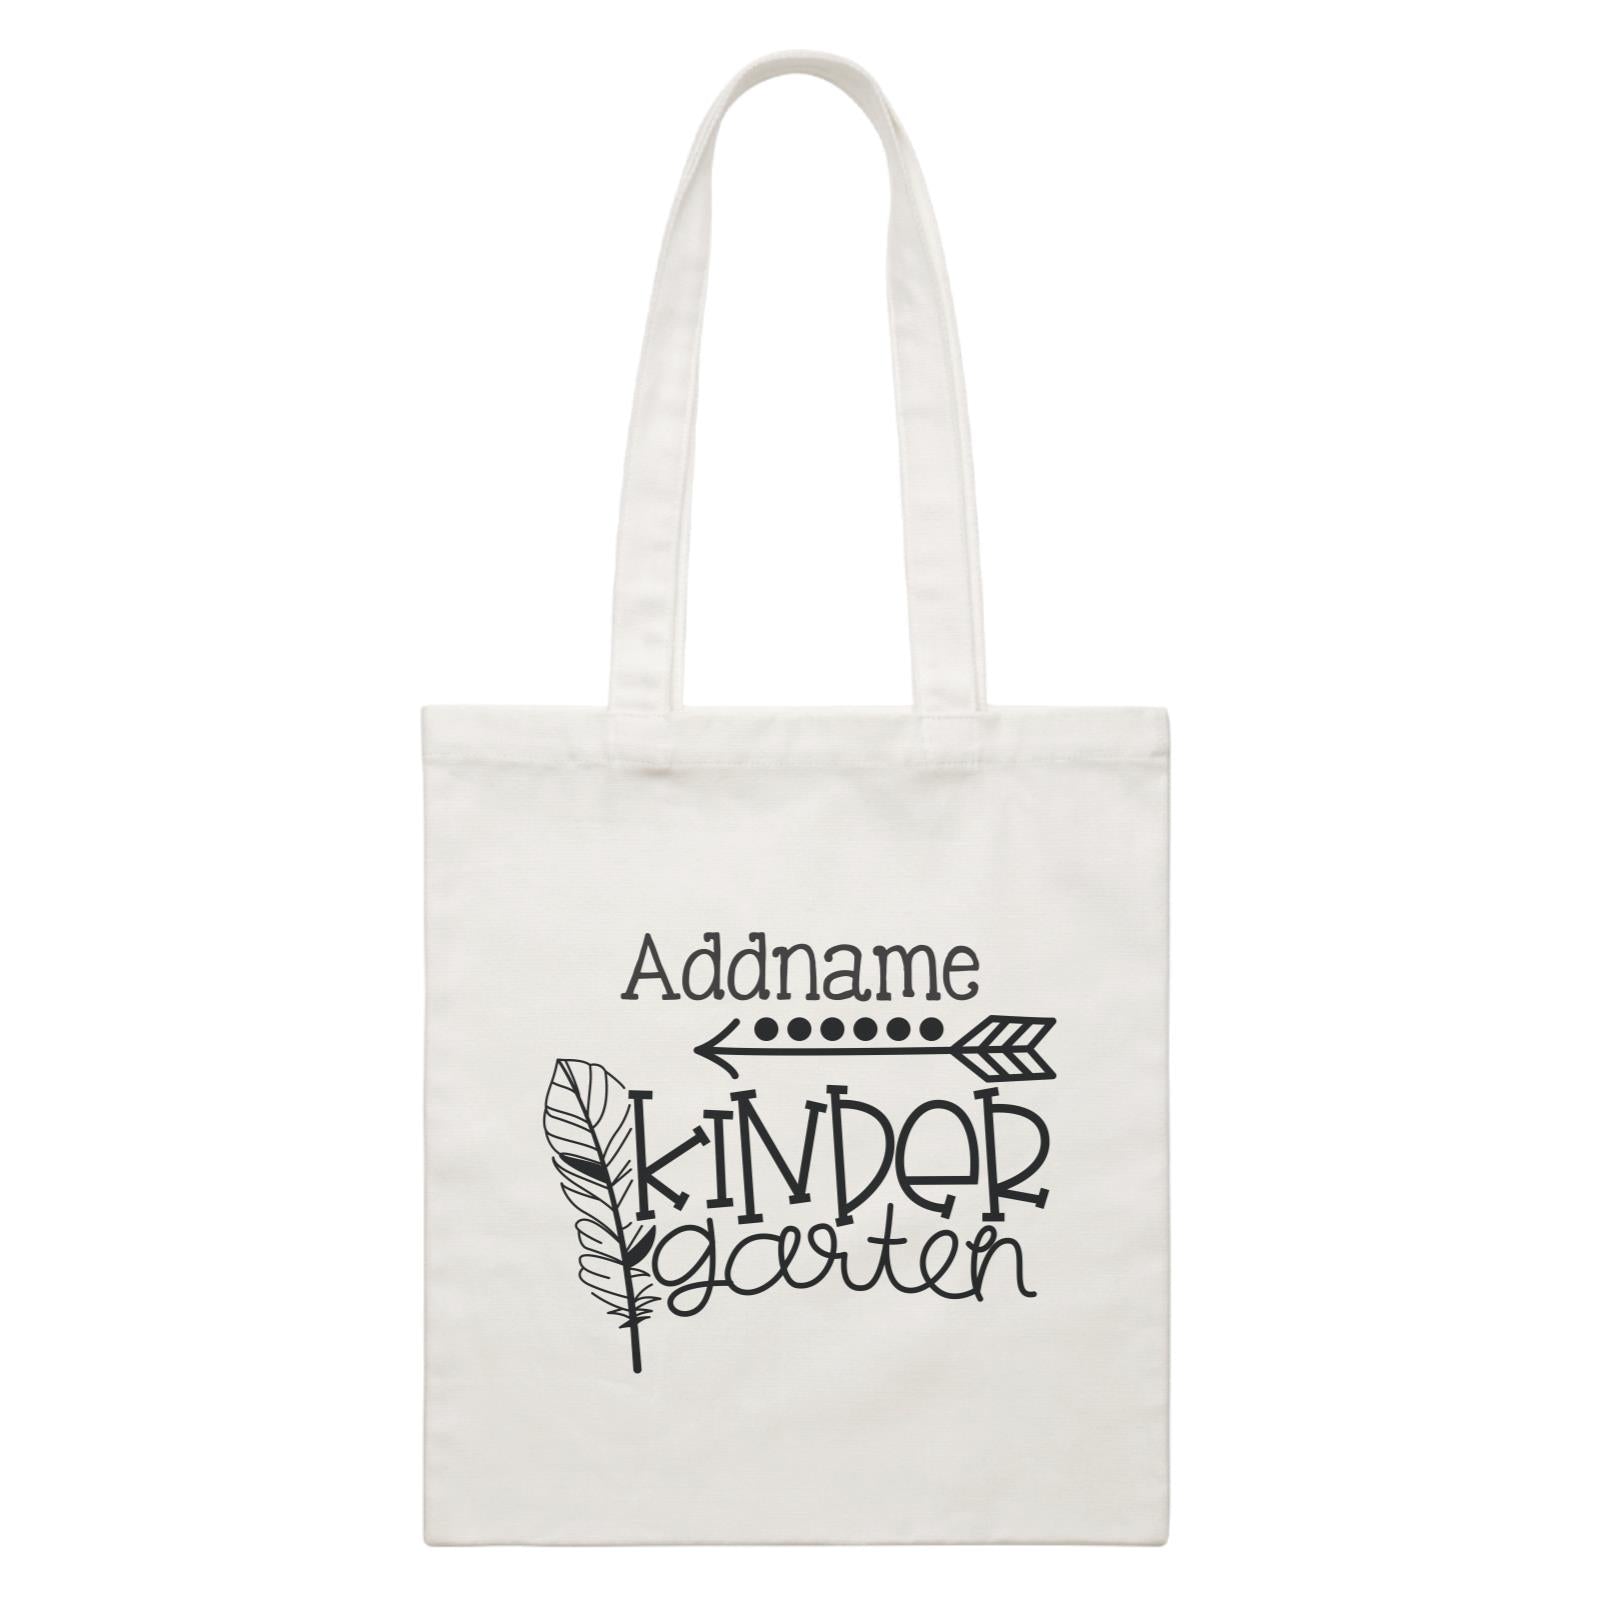 Graduation Series Second Grade with Feather White Canvas Bag